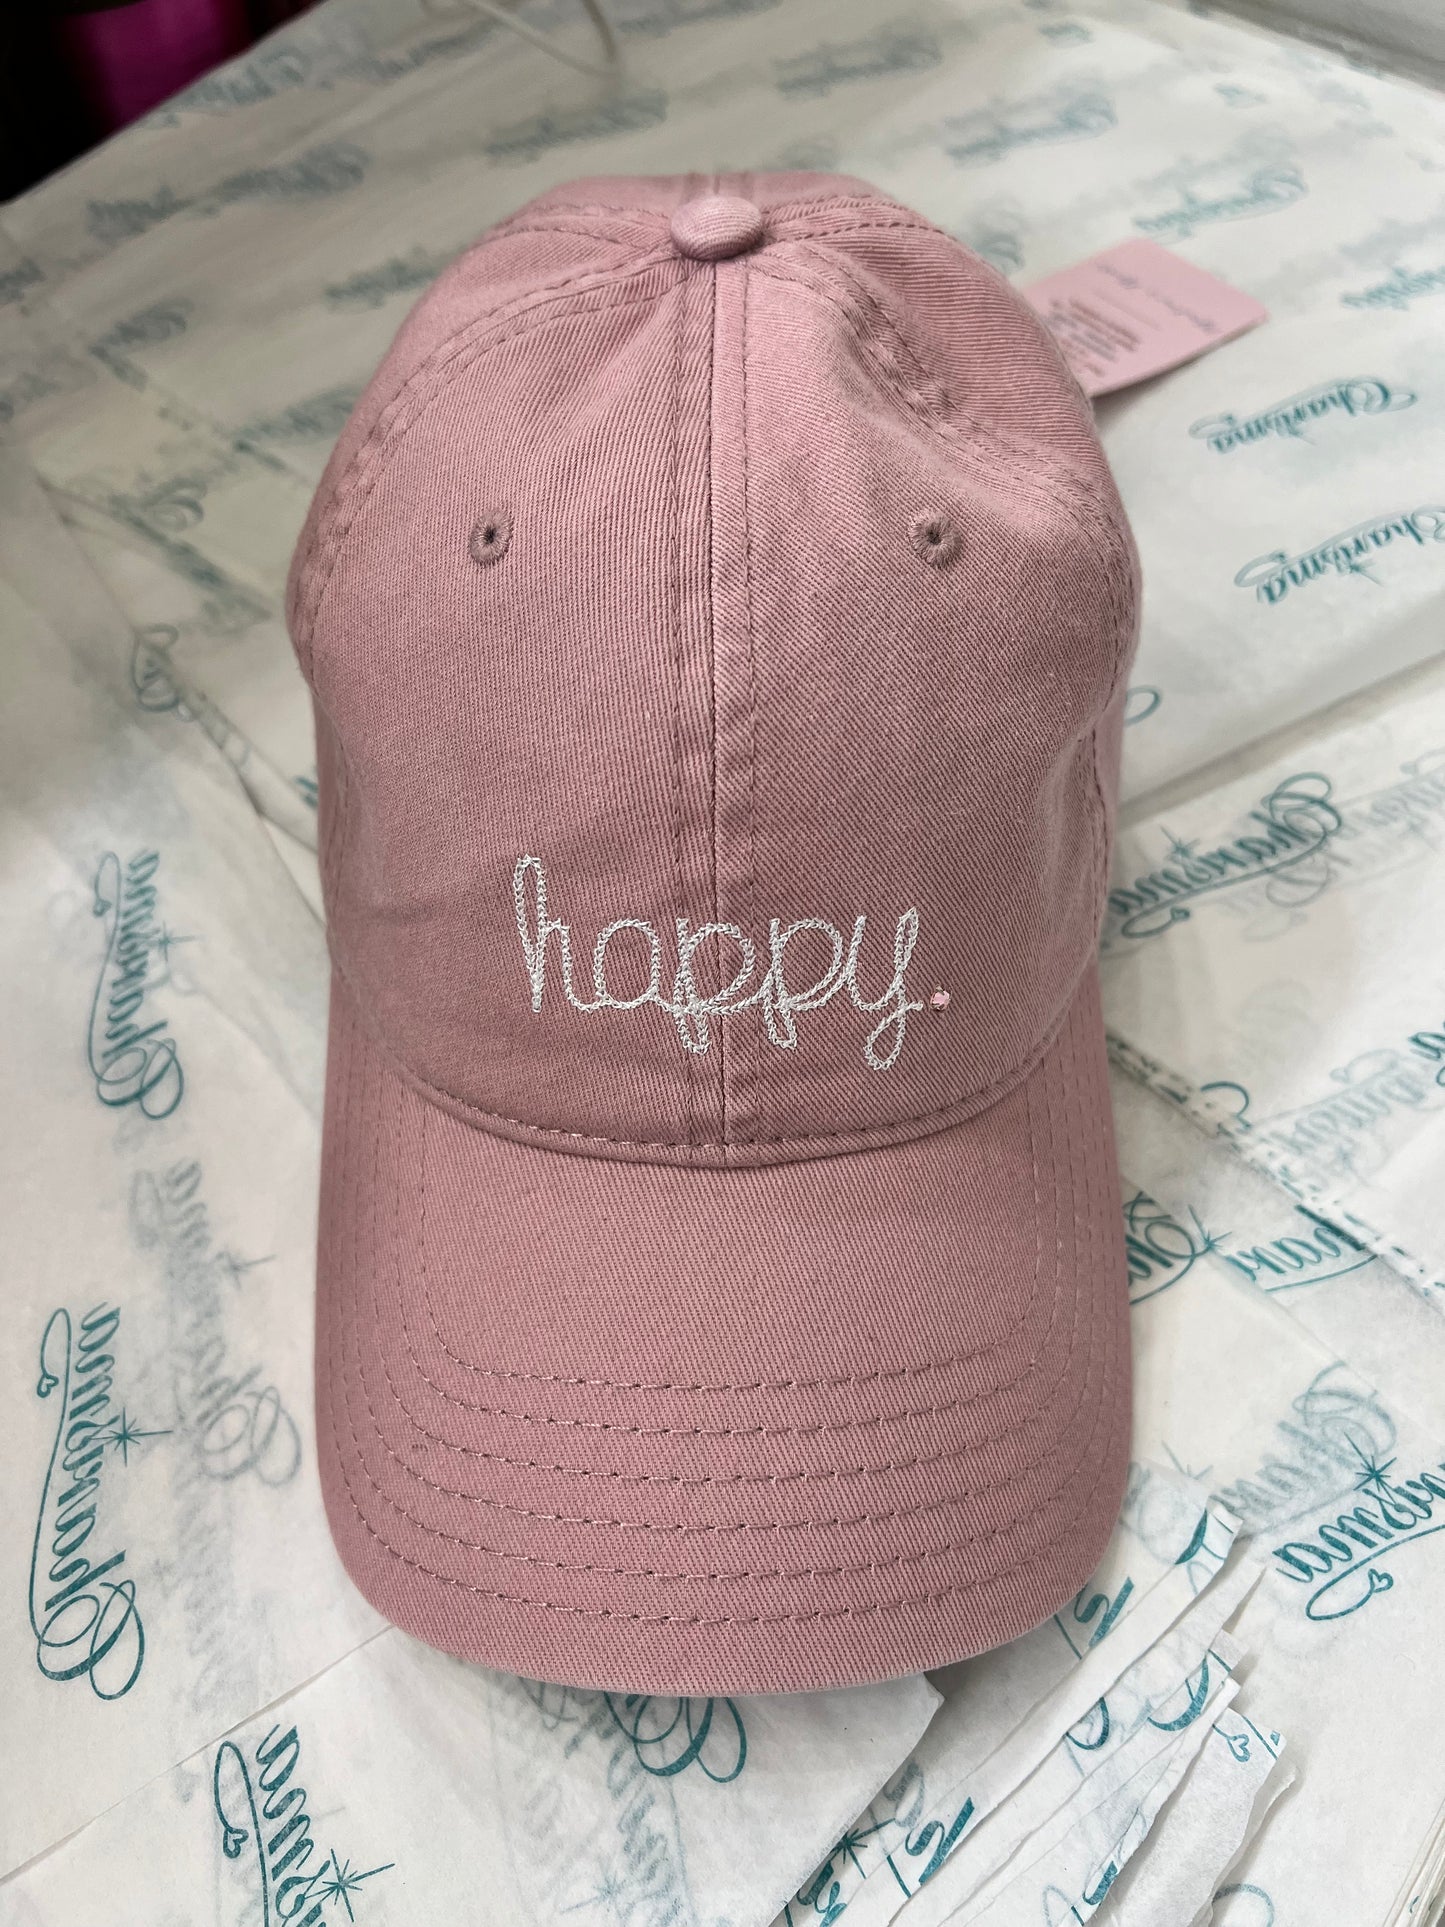 Baseball Cap Pink with "Happy"